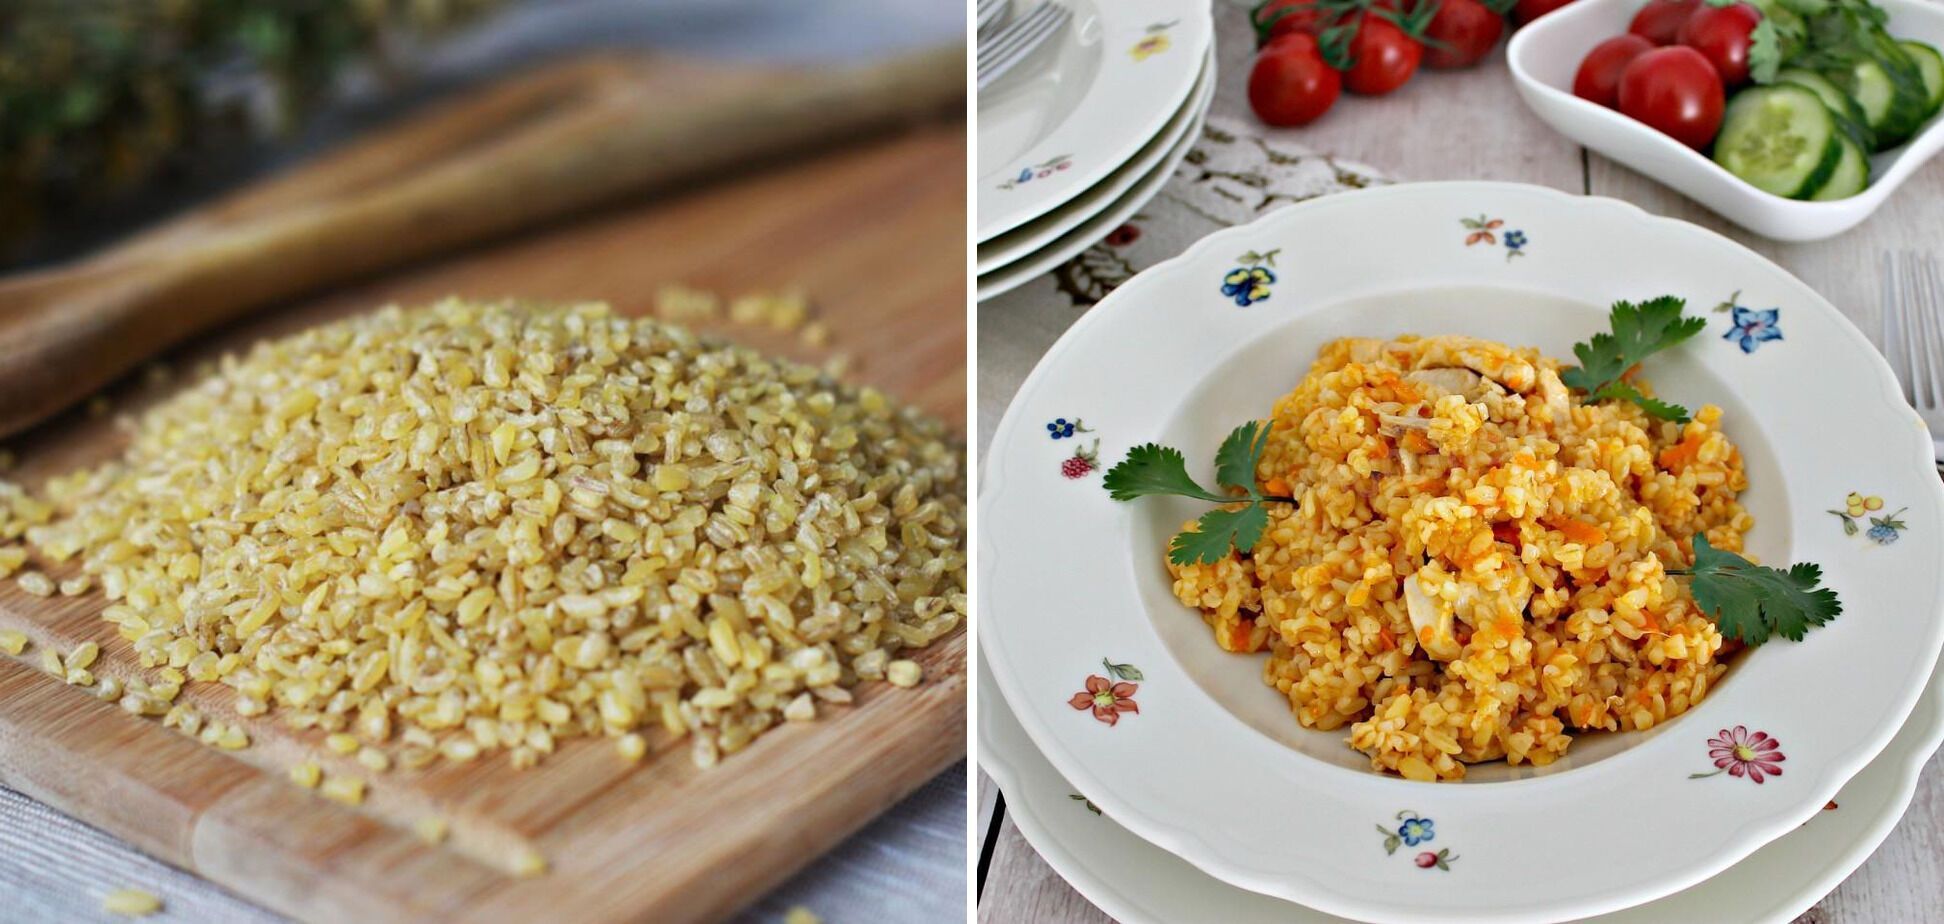 How to cook bulgur correctly